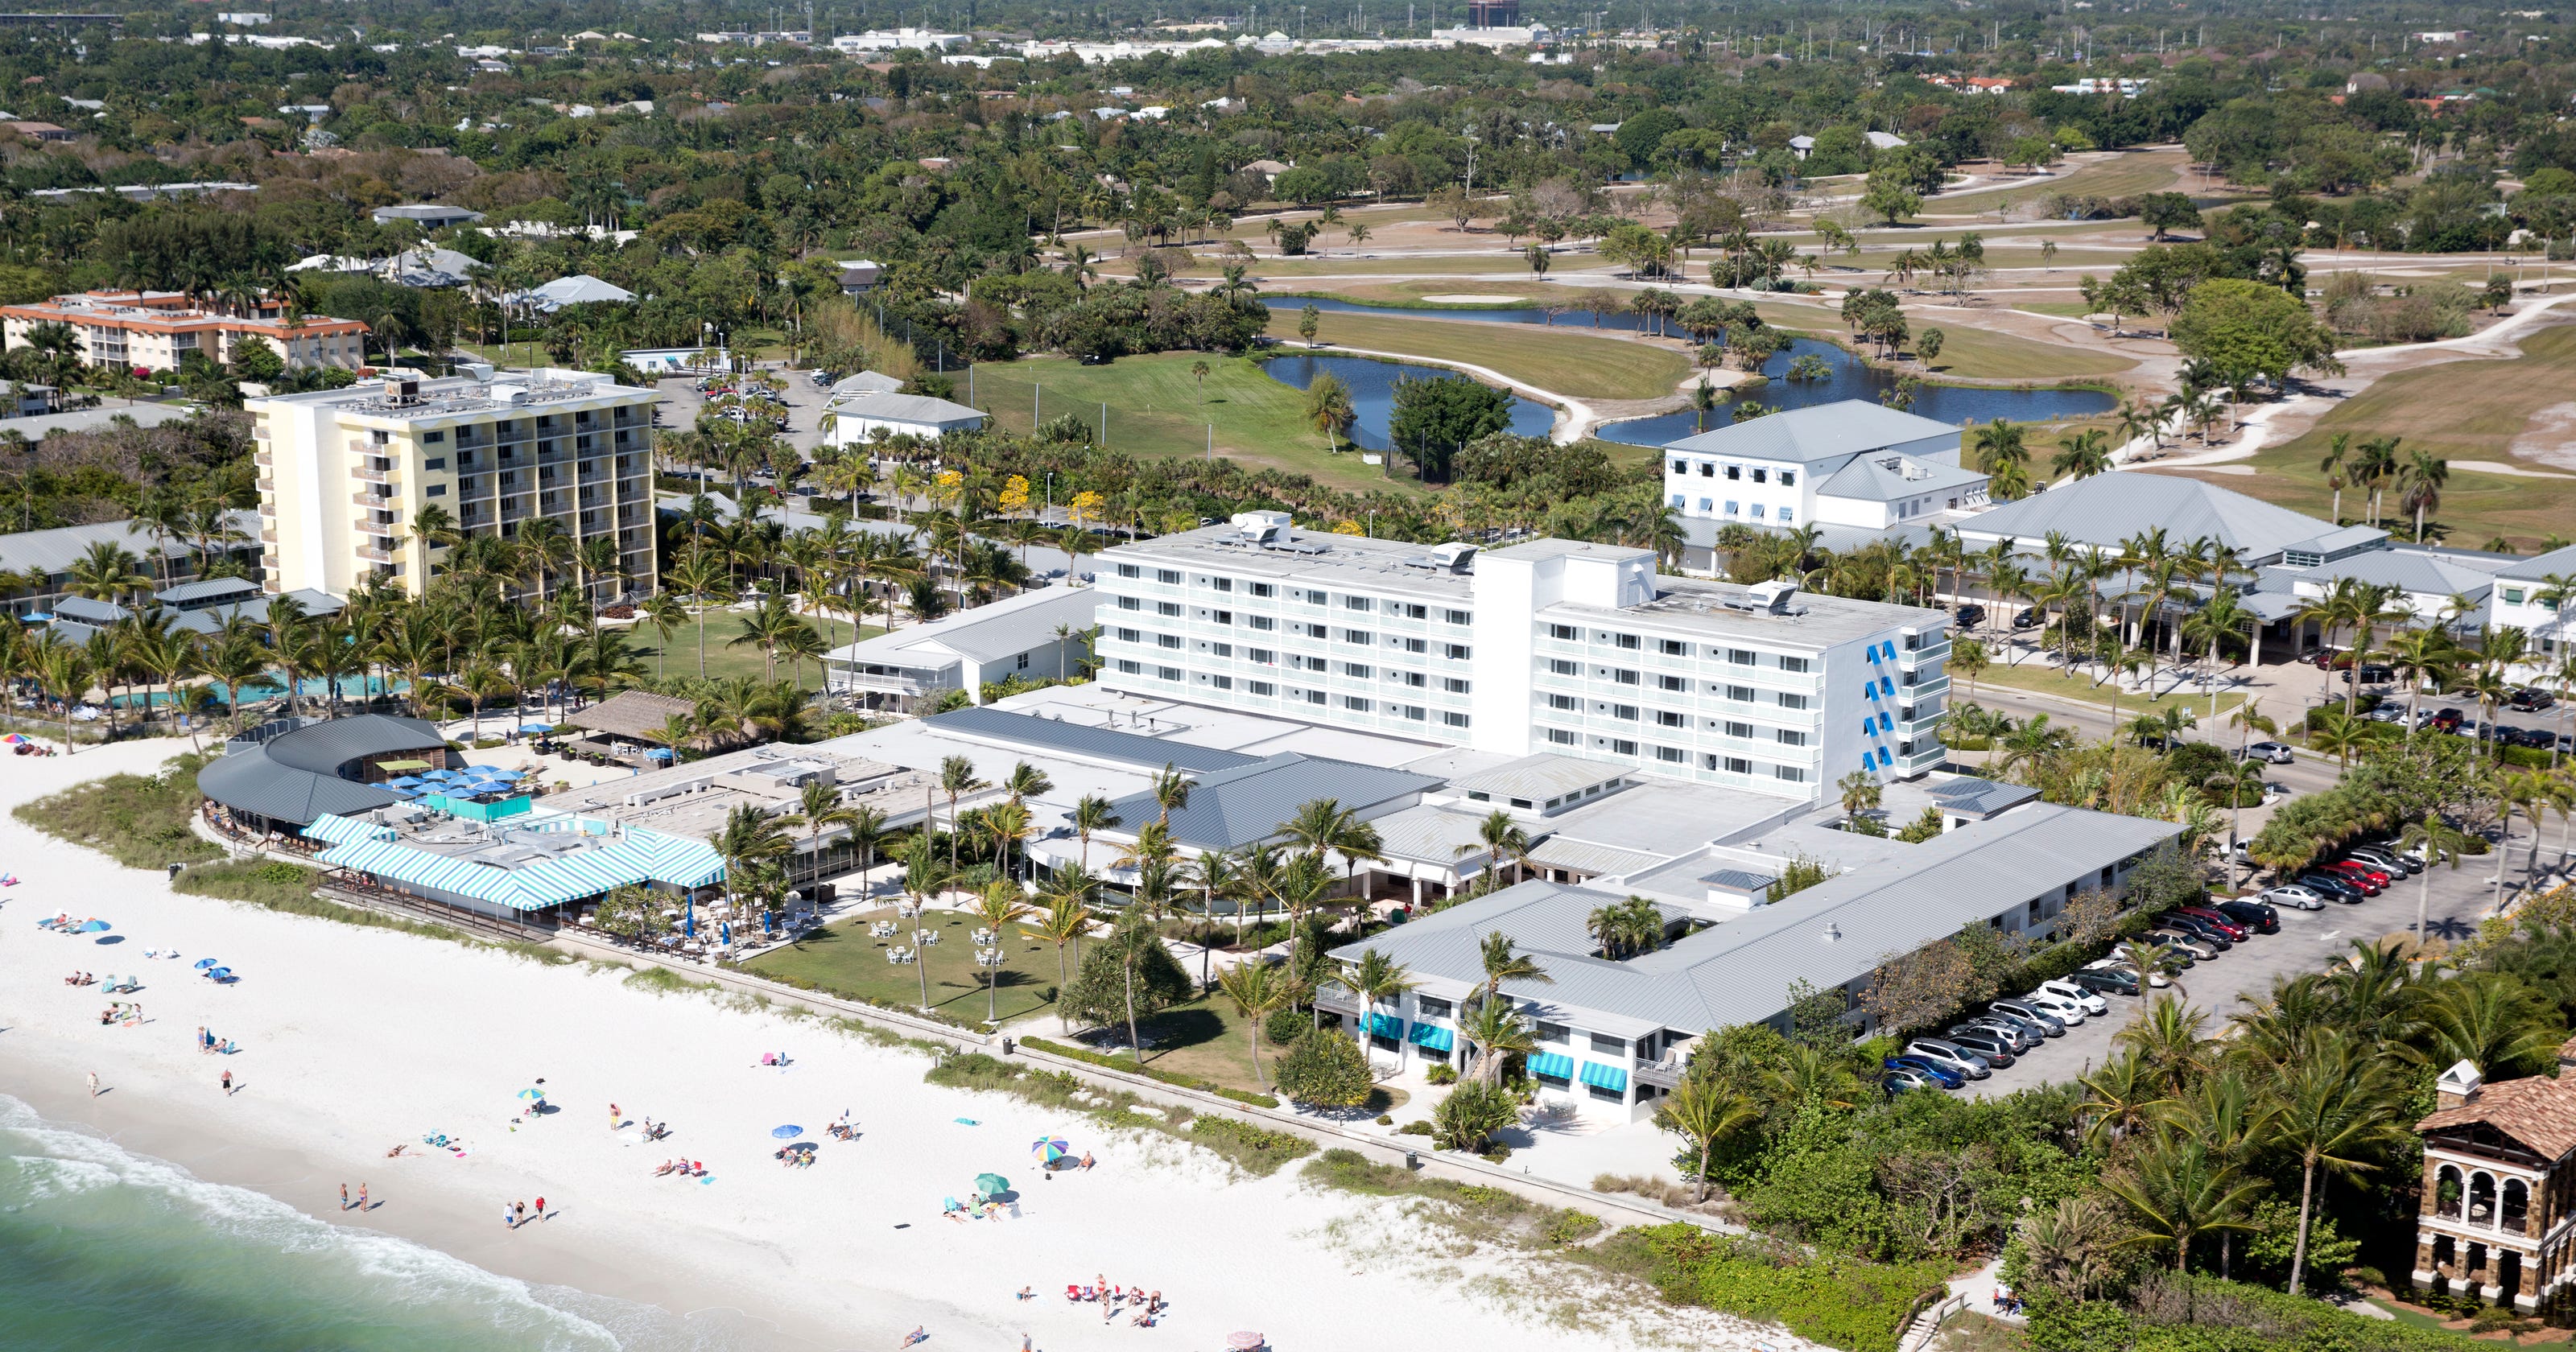 Naples Beach Hotel to be redeveloped